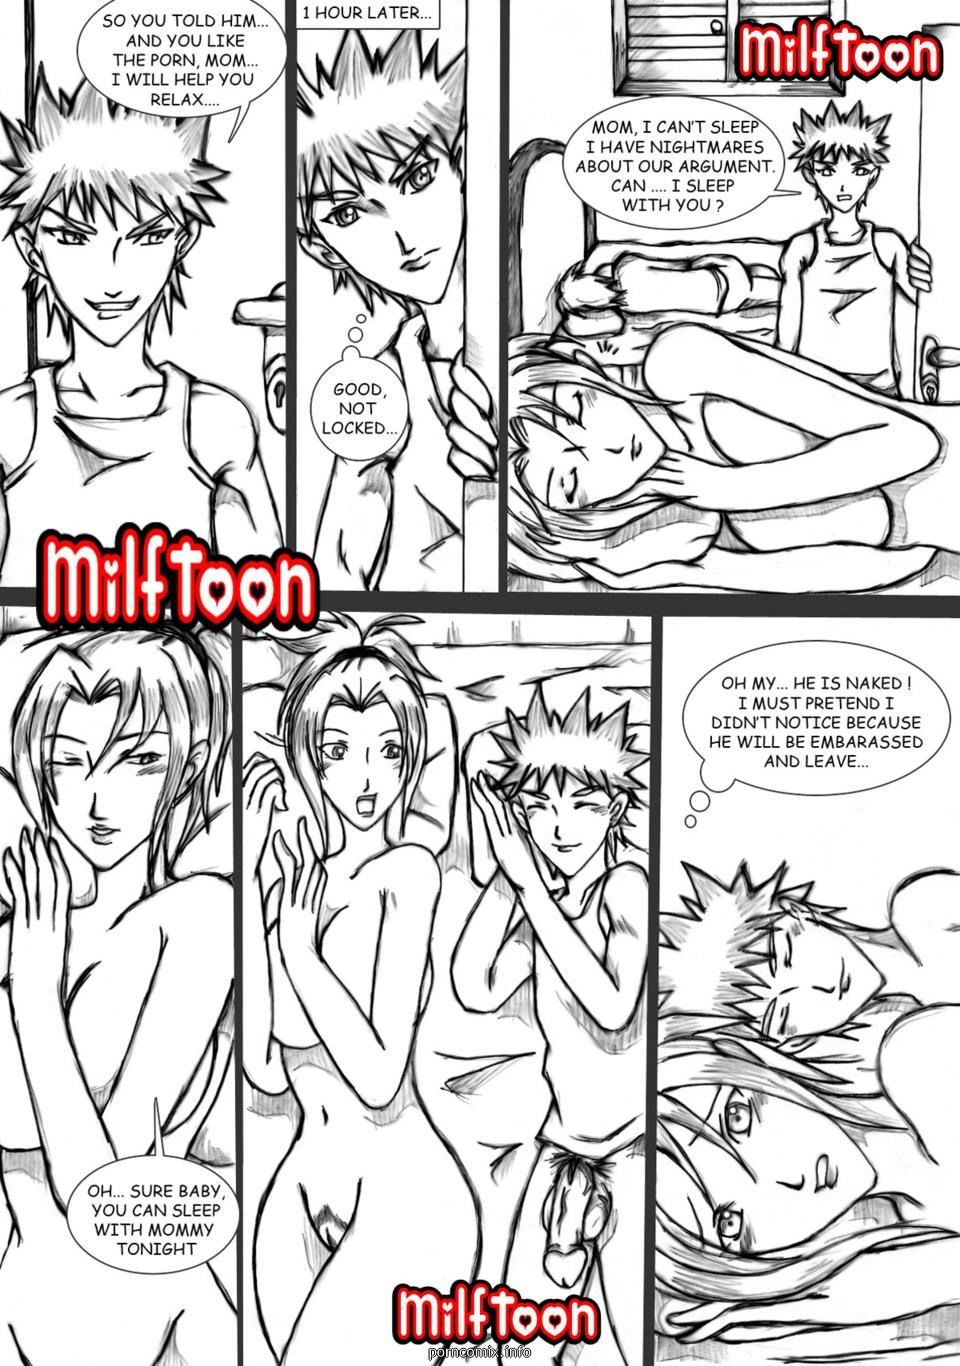 milftoon 抵抗 ママ page 1